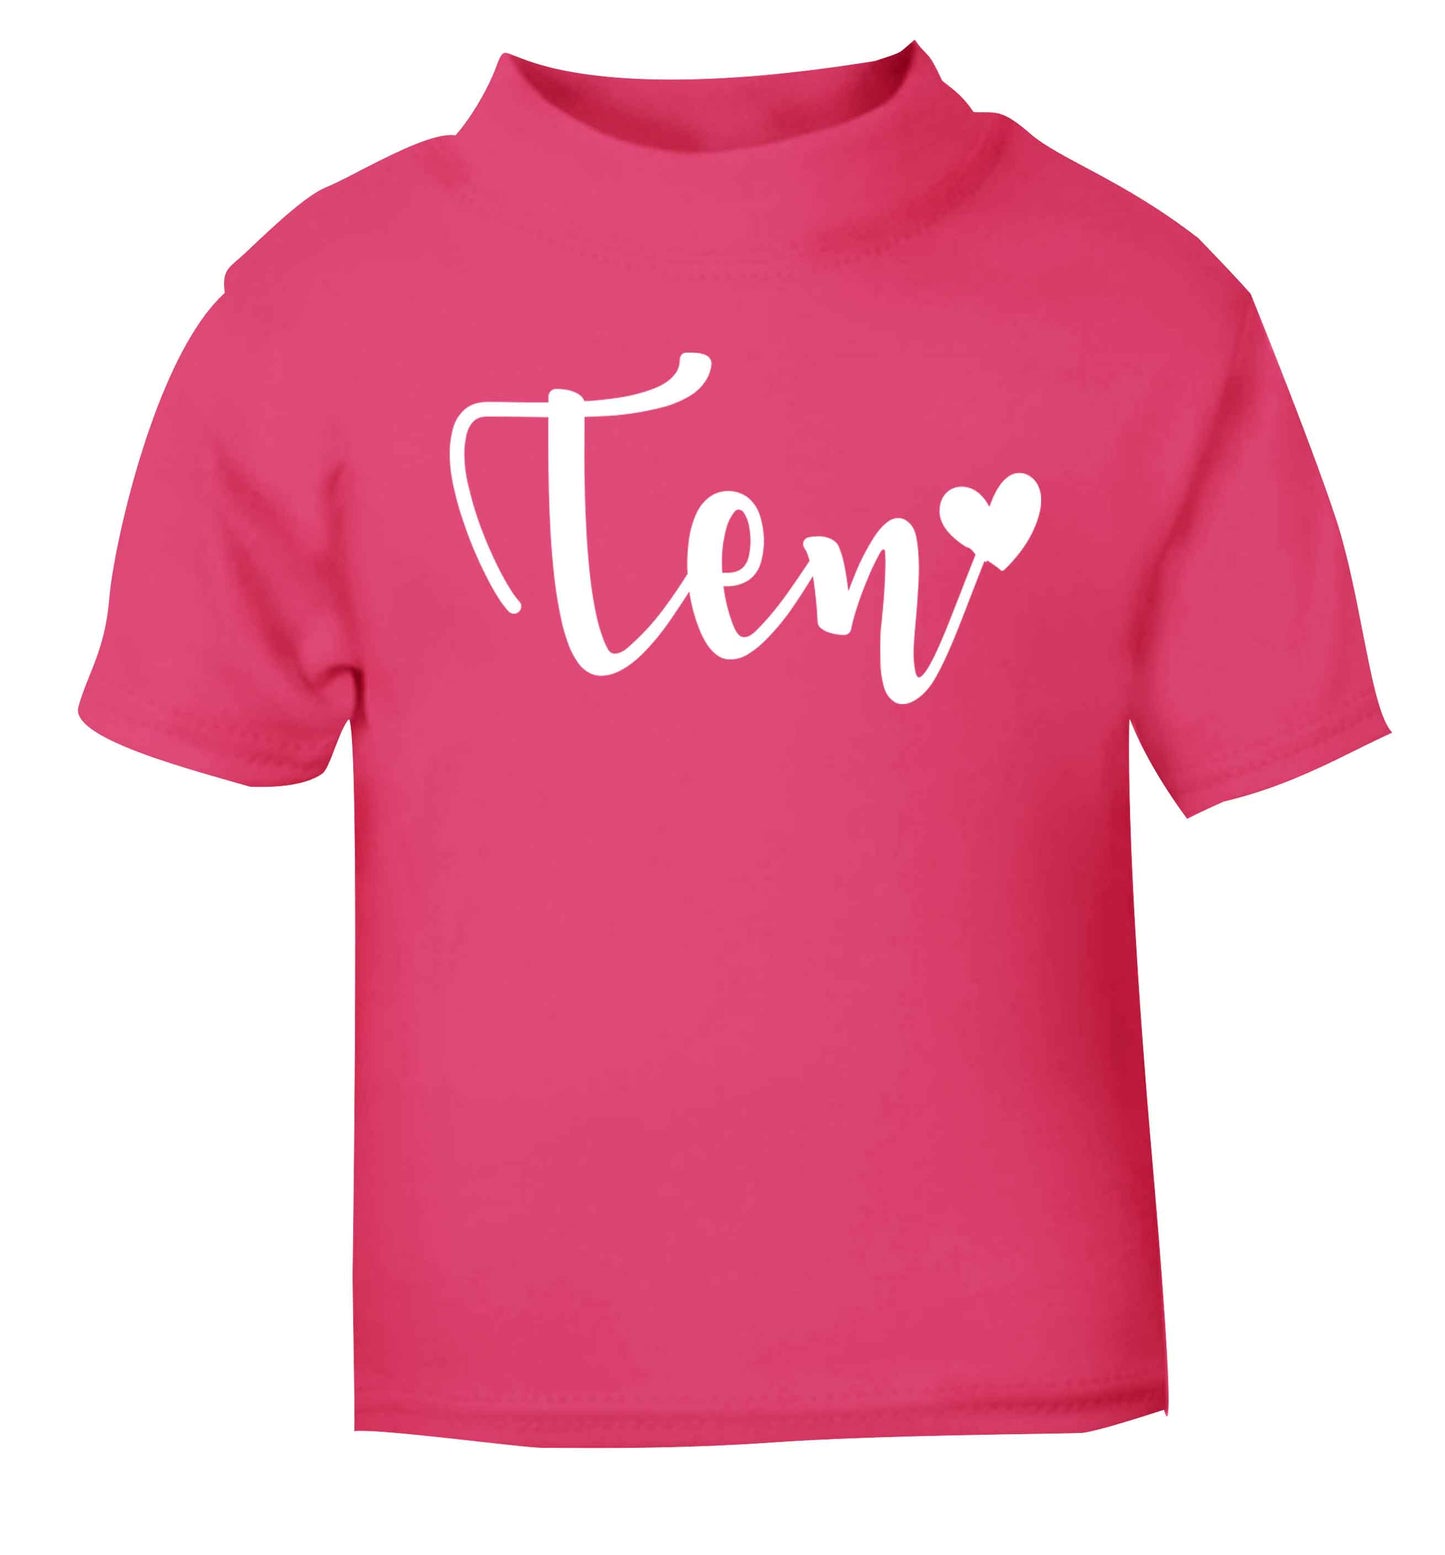 Ten and heart pink baby toddler Tshirt 2 Years